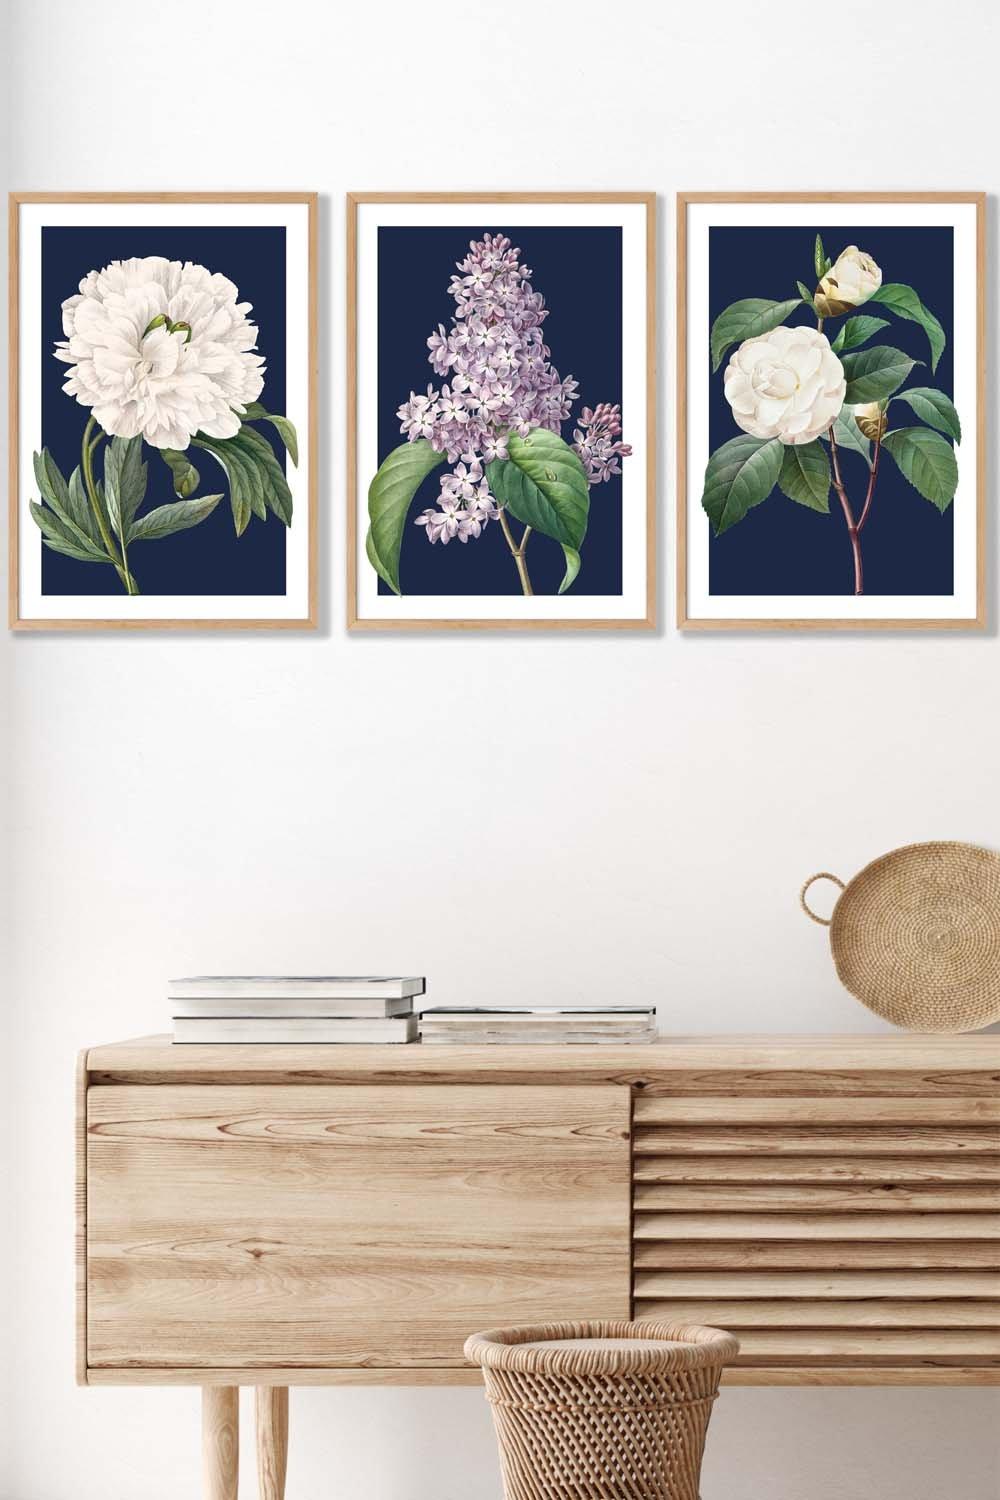 Set of 3 Oak Framed Vintage Flowers Lilac, Peony and Camellia on Navy Blue Wall Art